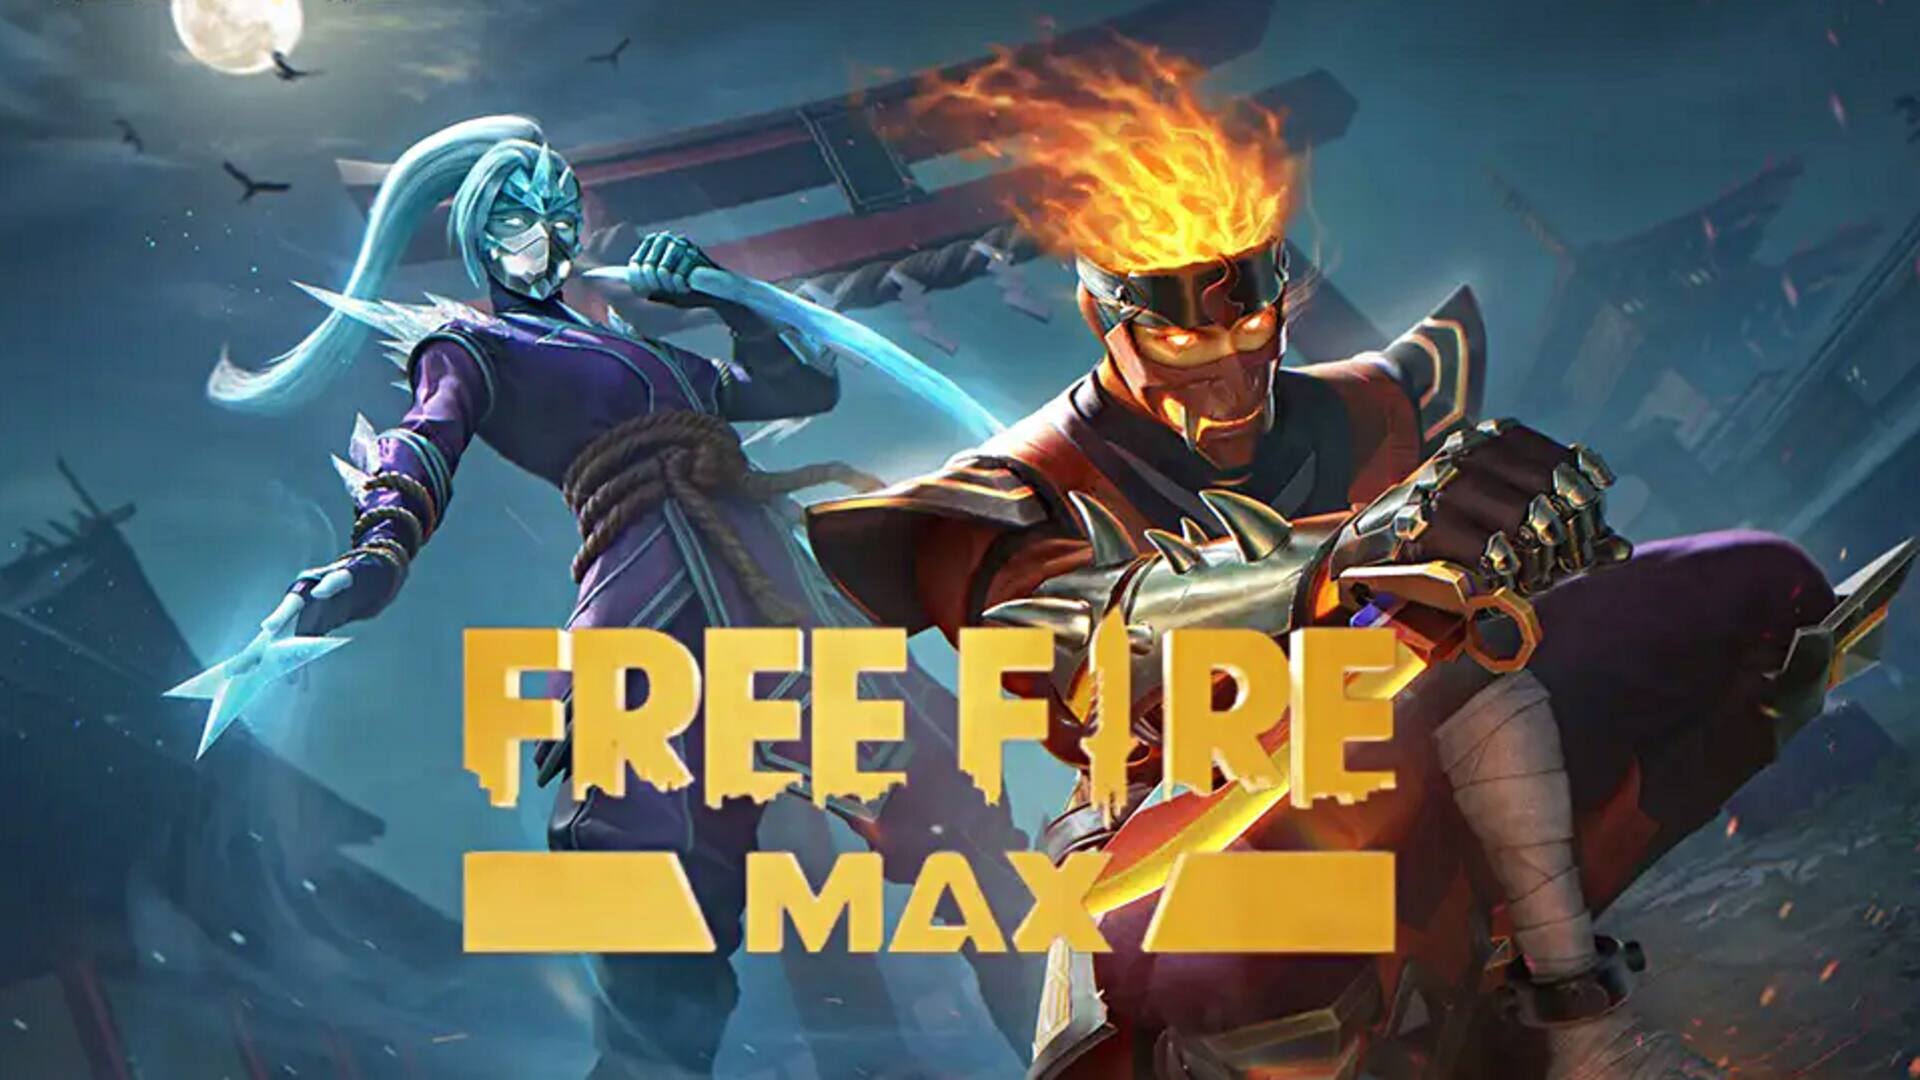 Free Fire MAX codes for January 5: How to redeem